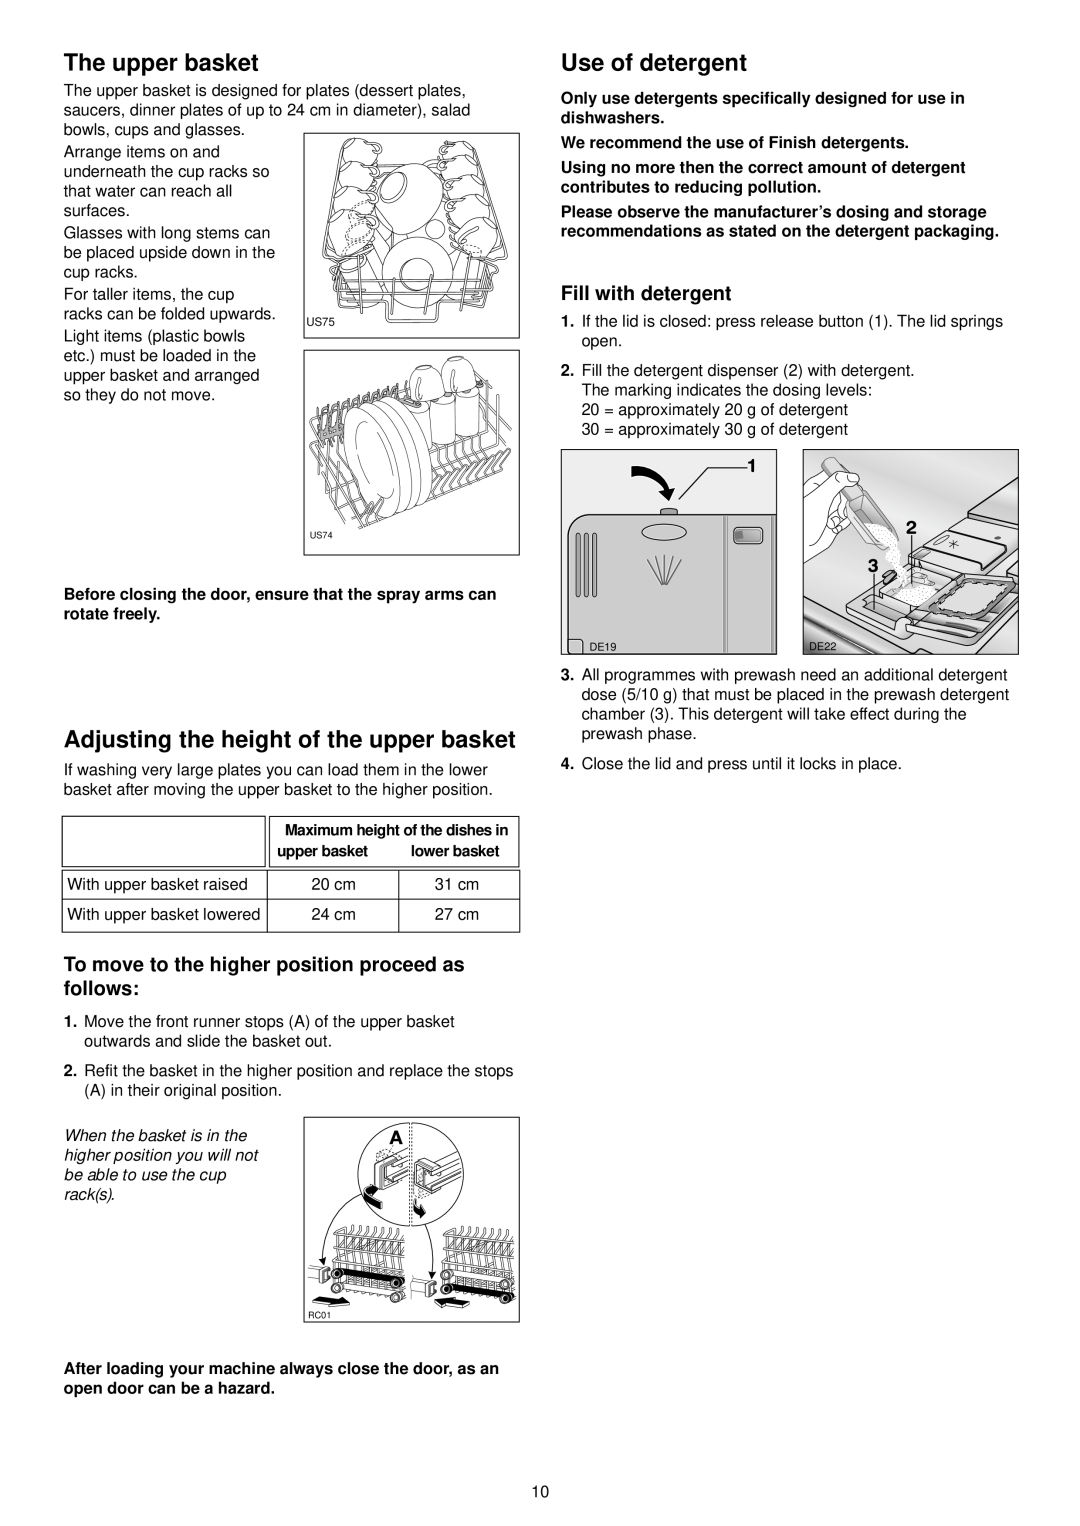 Zanussi ZSF 4111 manual The upper basket, Adjusting the height of the upper basket, Use of detergent, Fill with detergent 